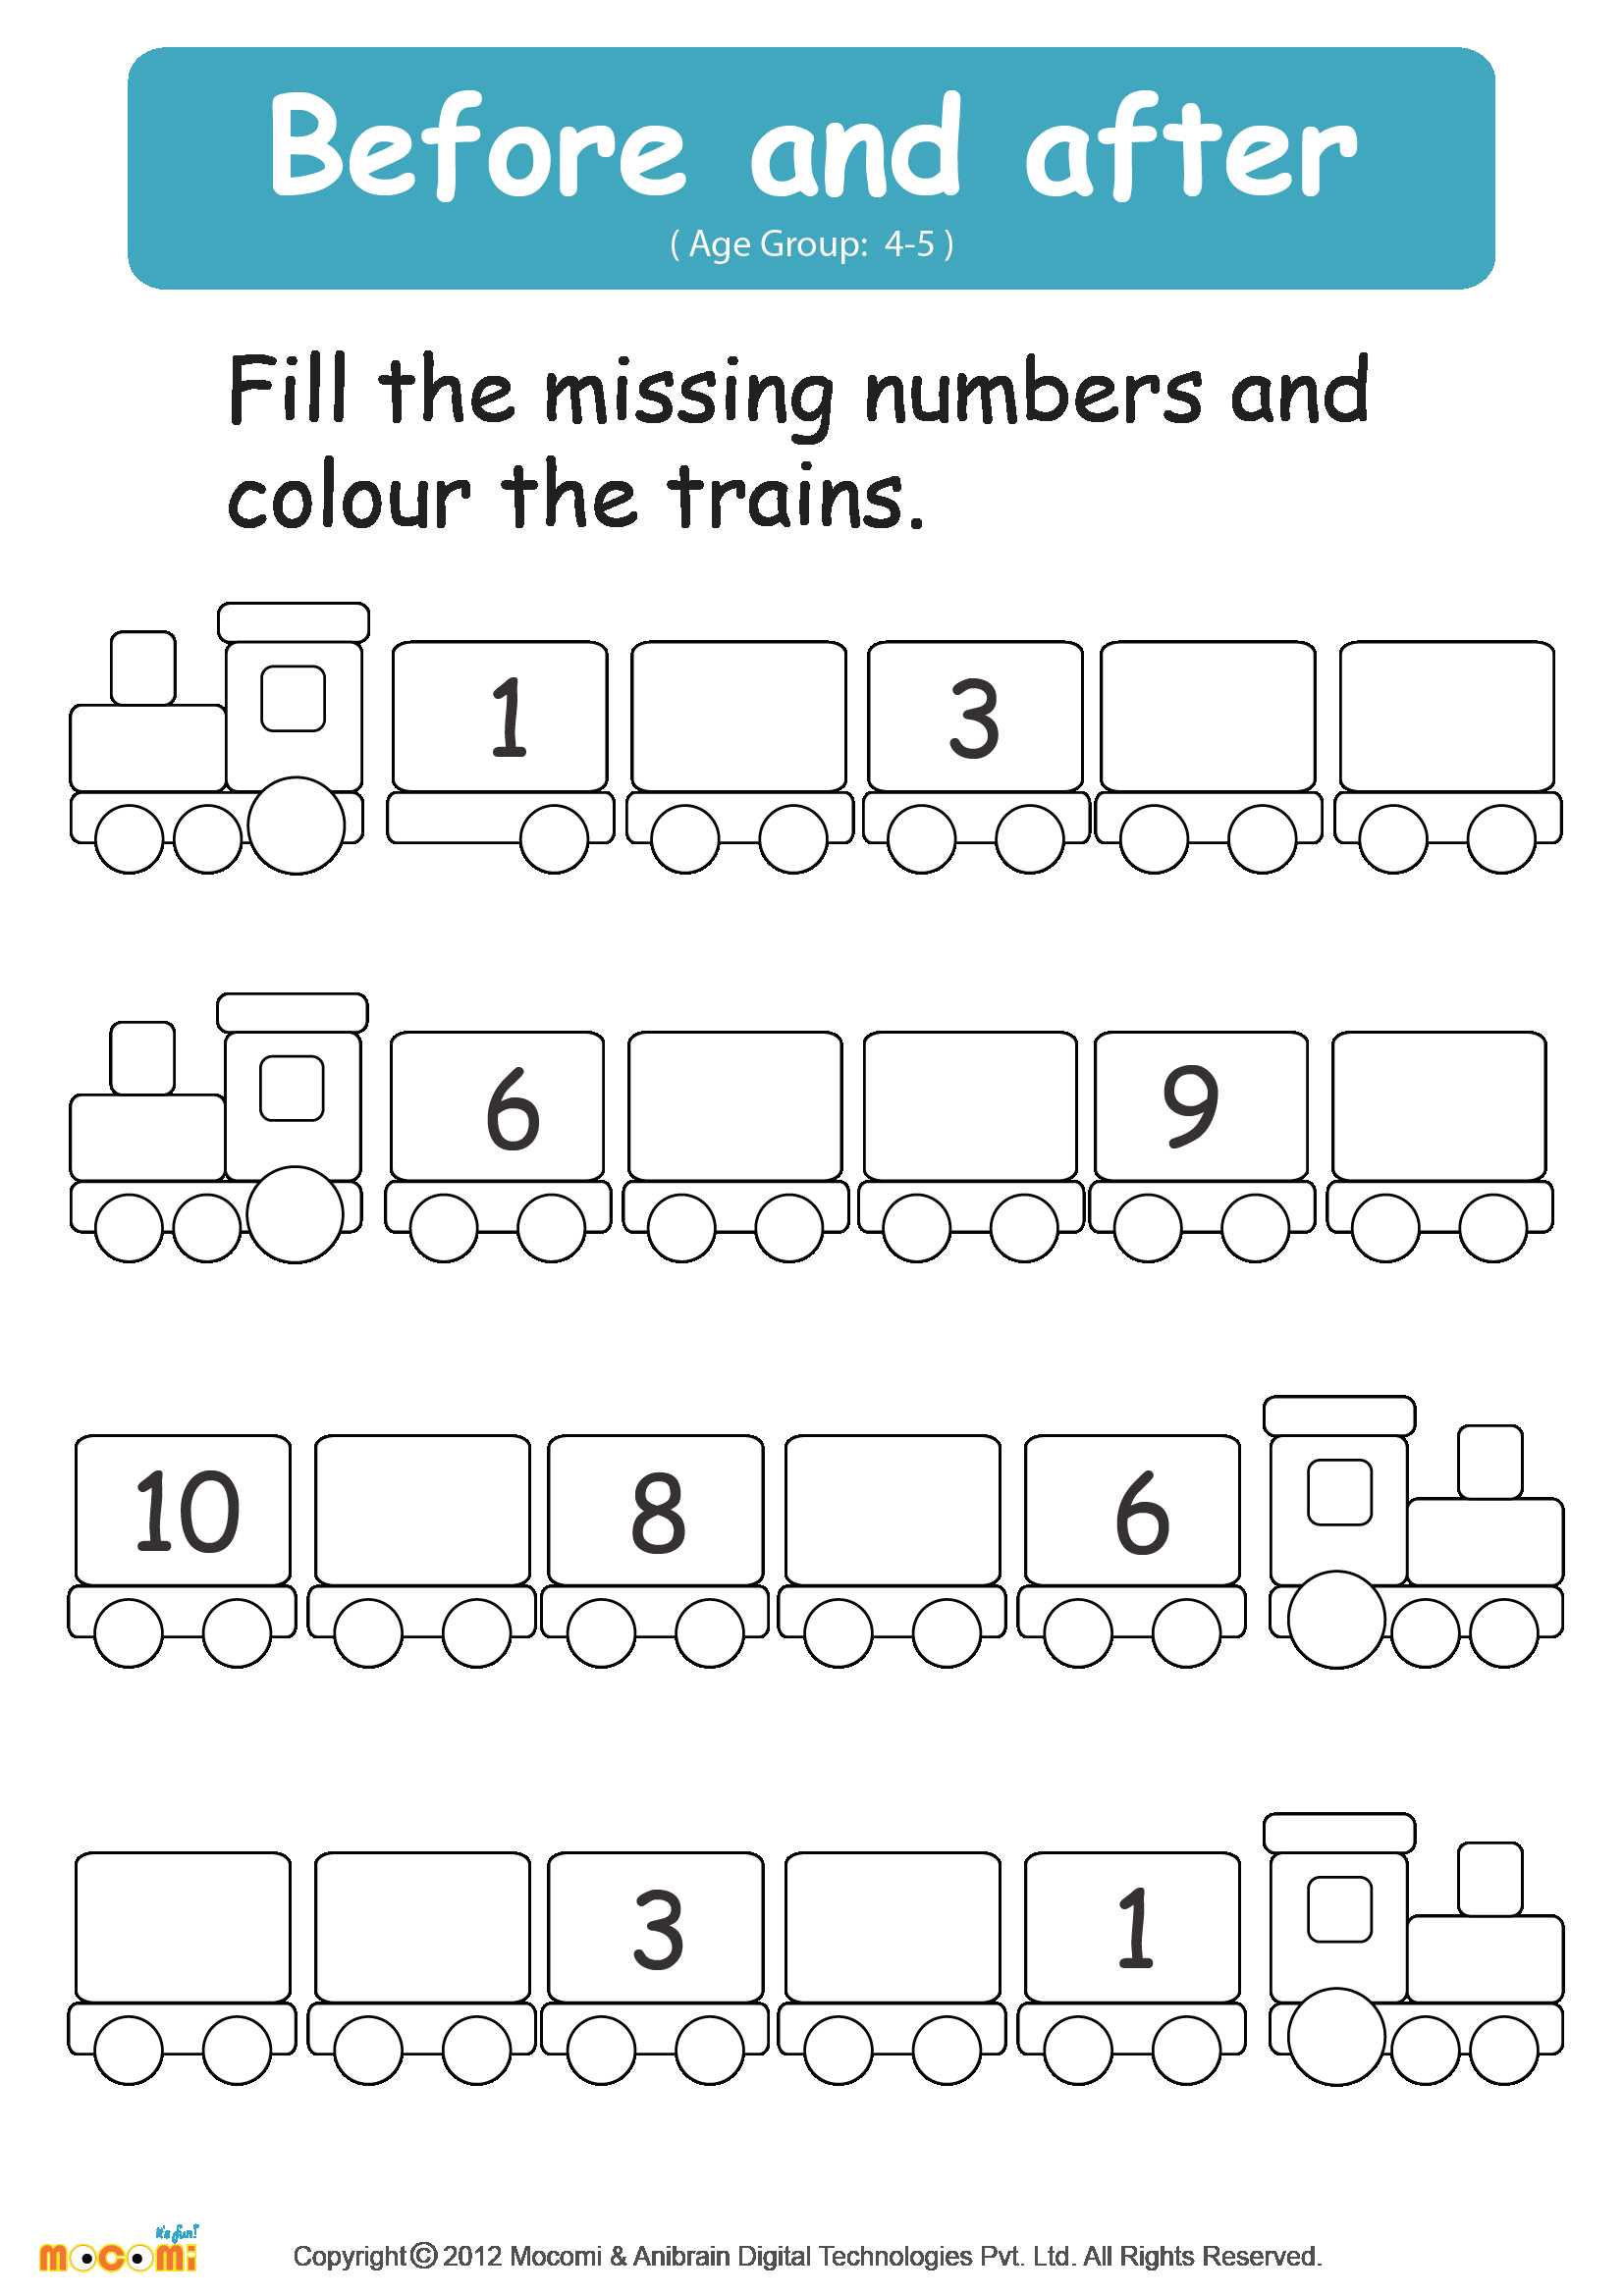 Theme Worksheet 4 Also before and after Numbers Worksheet Math for Kids